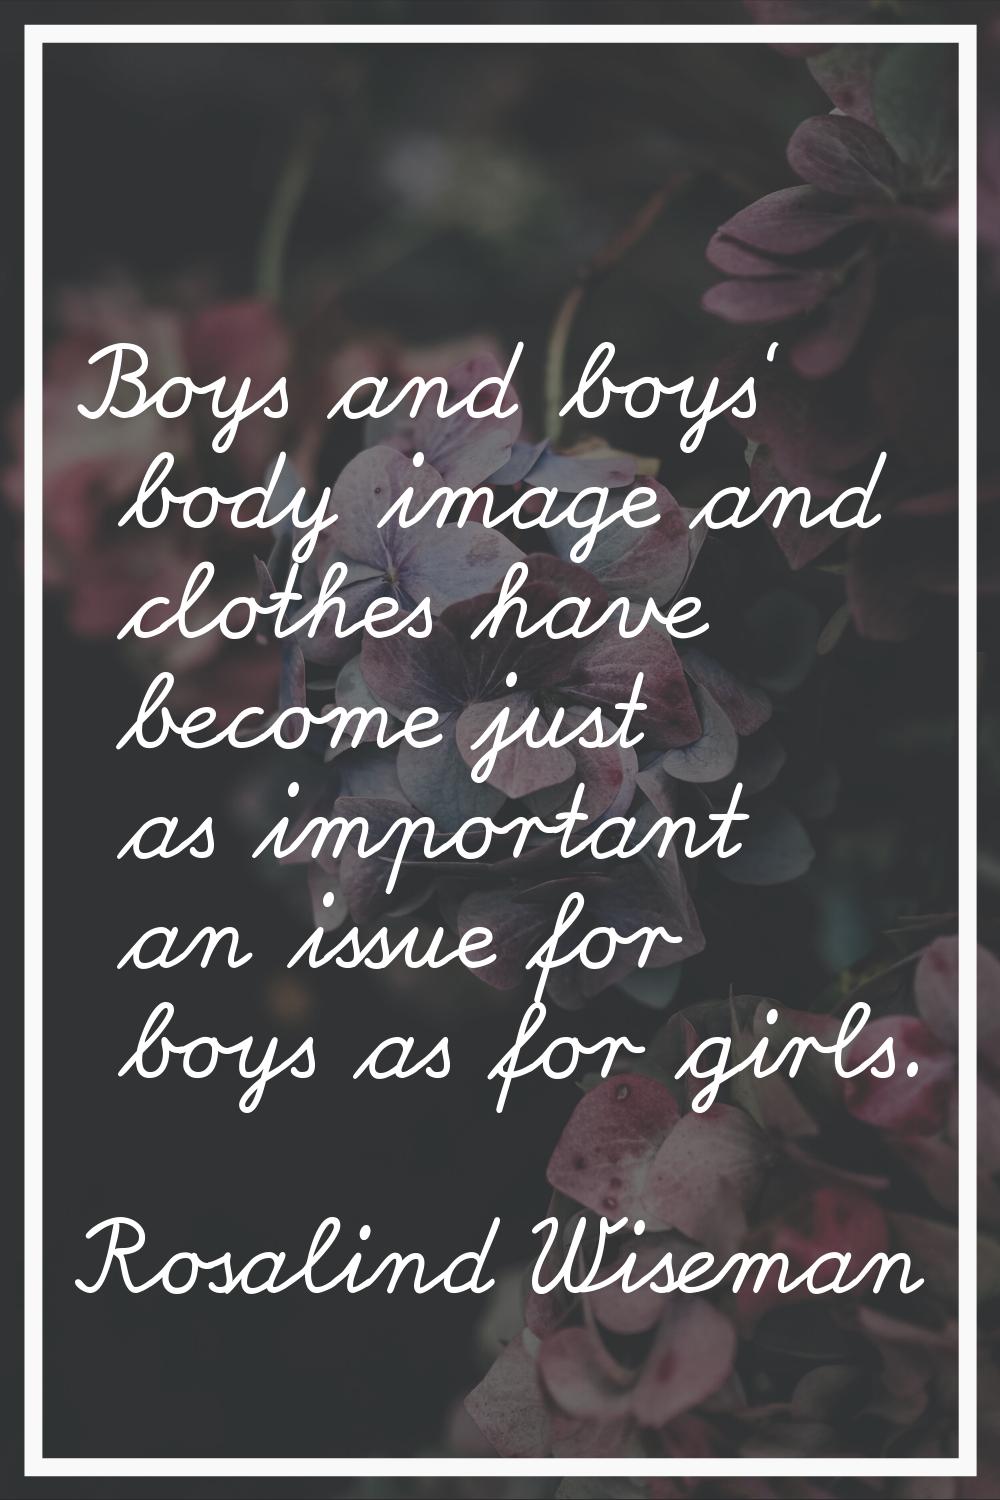 Boys and boys' body image and clothes have become just as important an issue for boys as for girls.